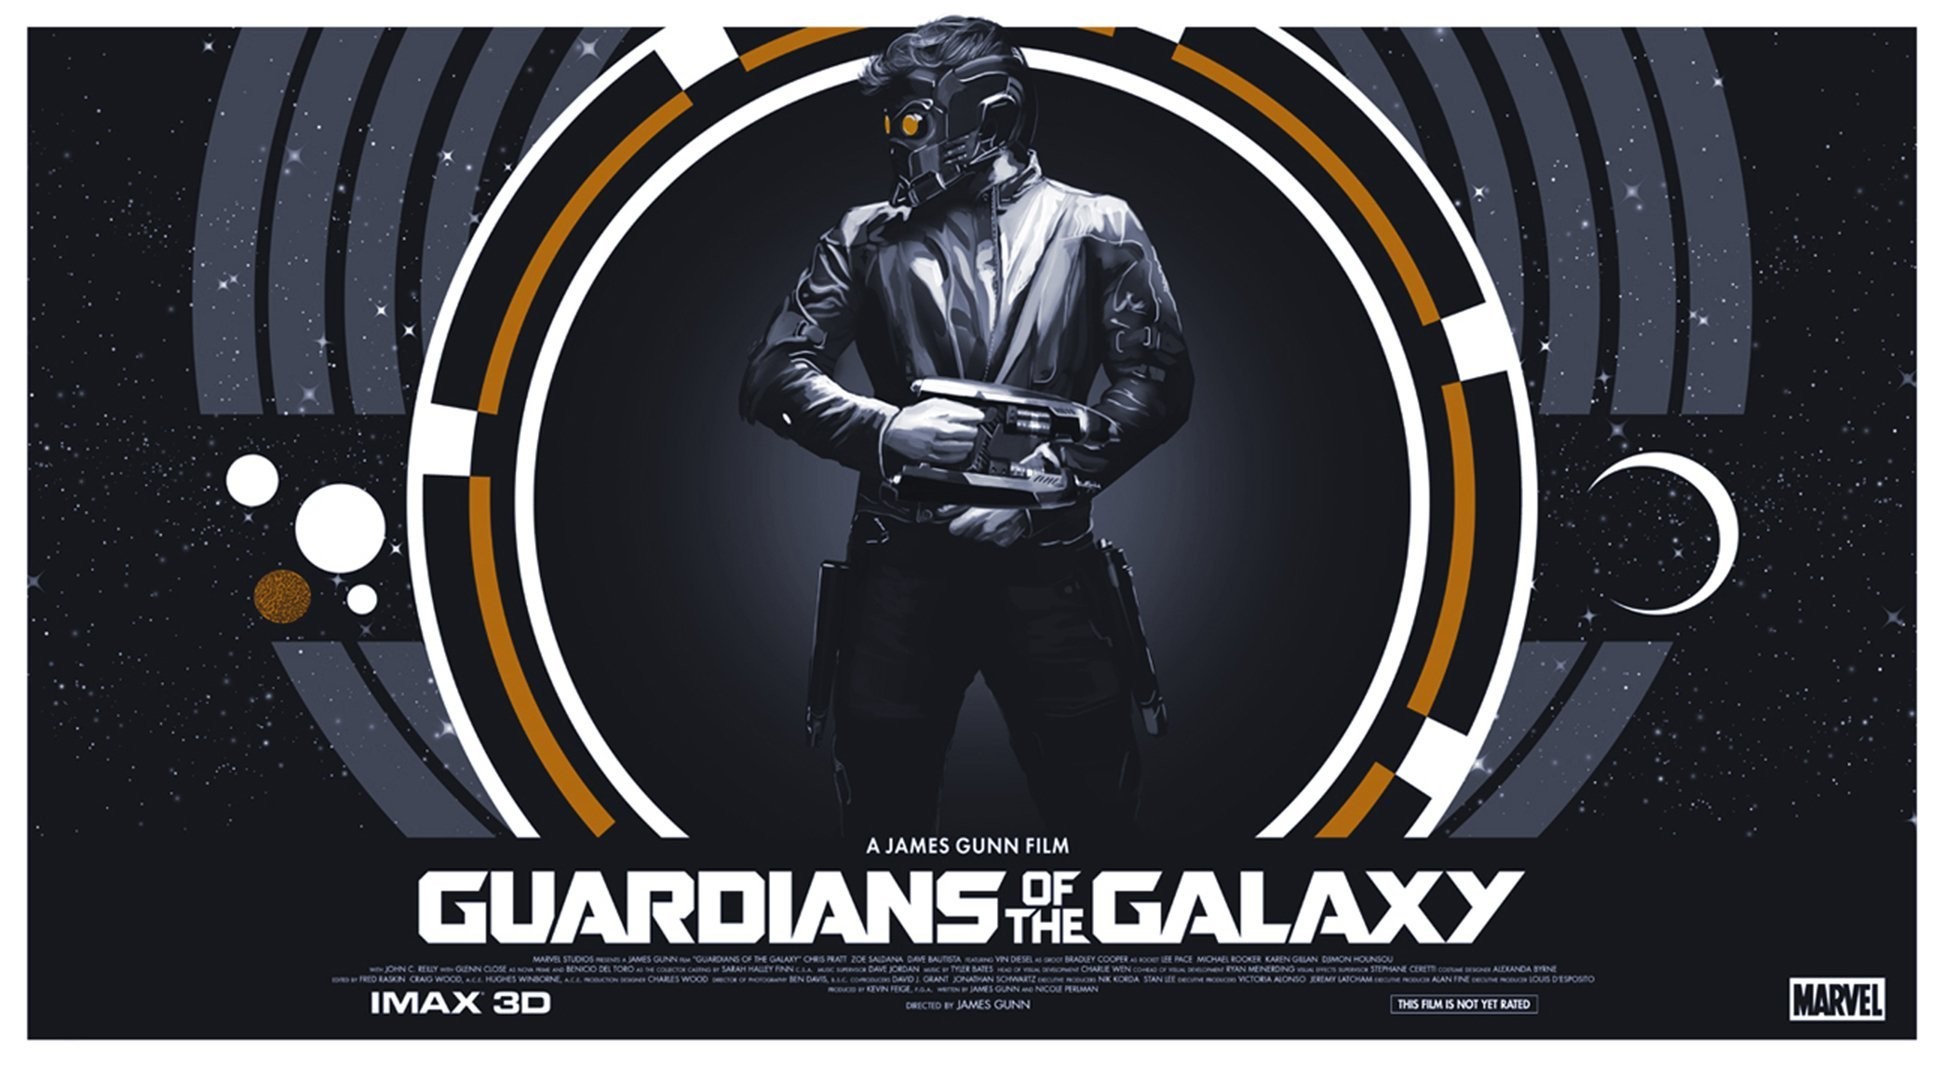 1944x1080 guardians of the galaxy guardians of the galaxy poster peter quill star-lord